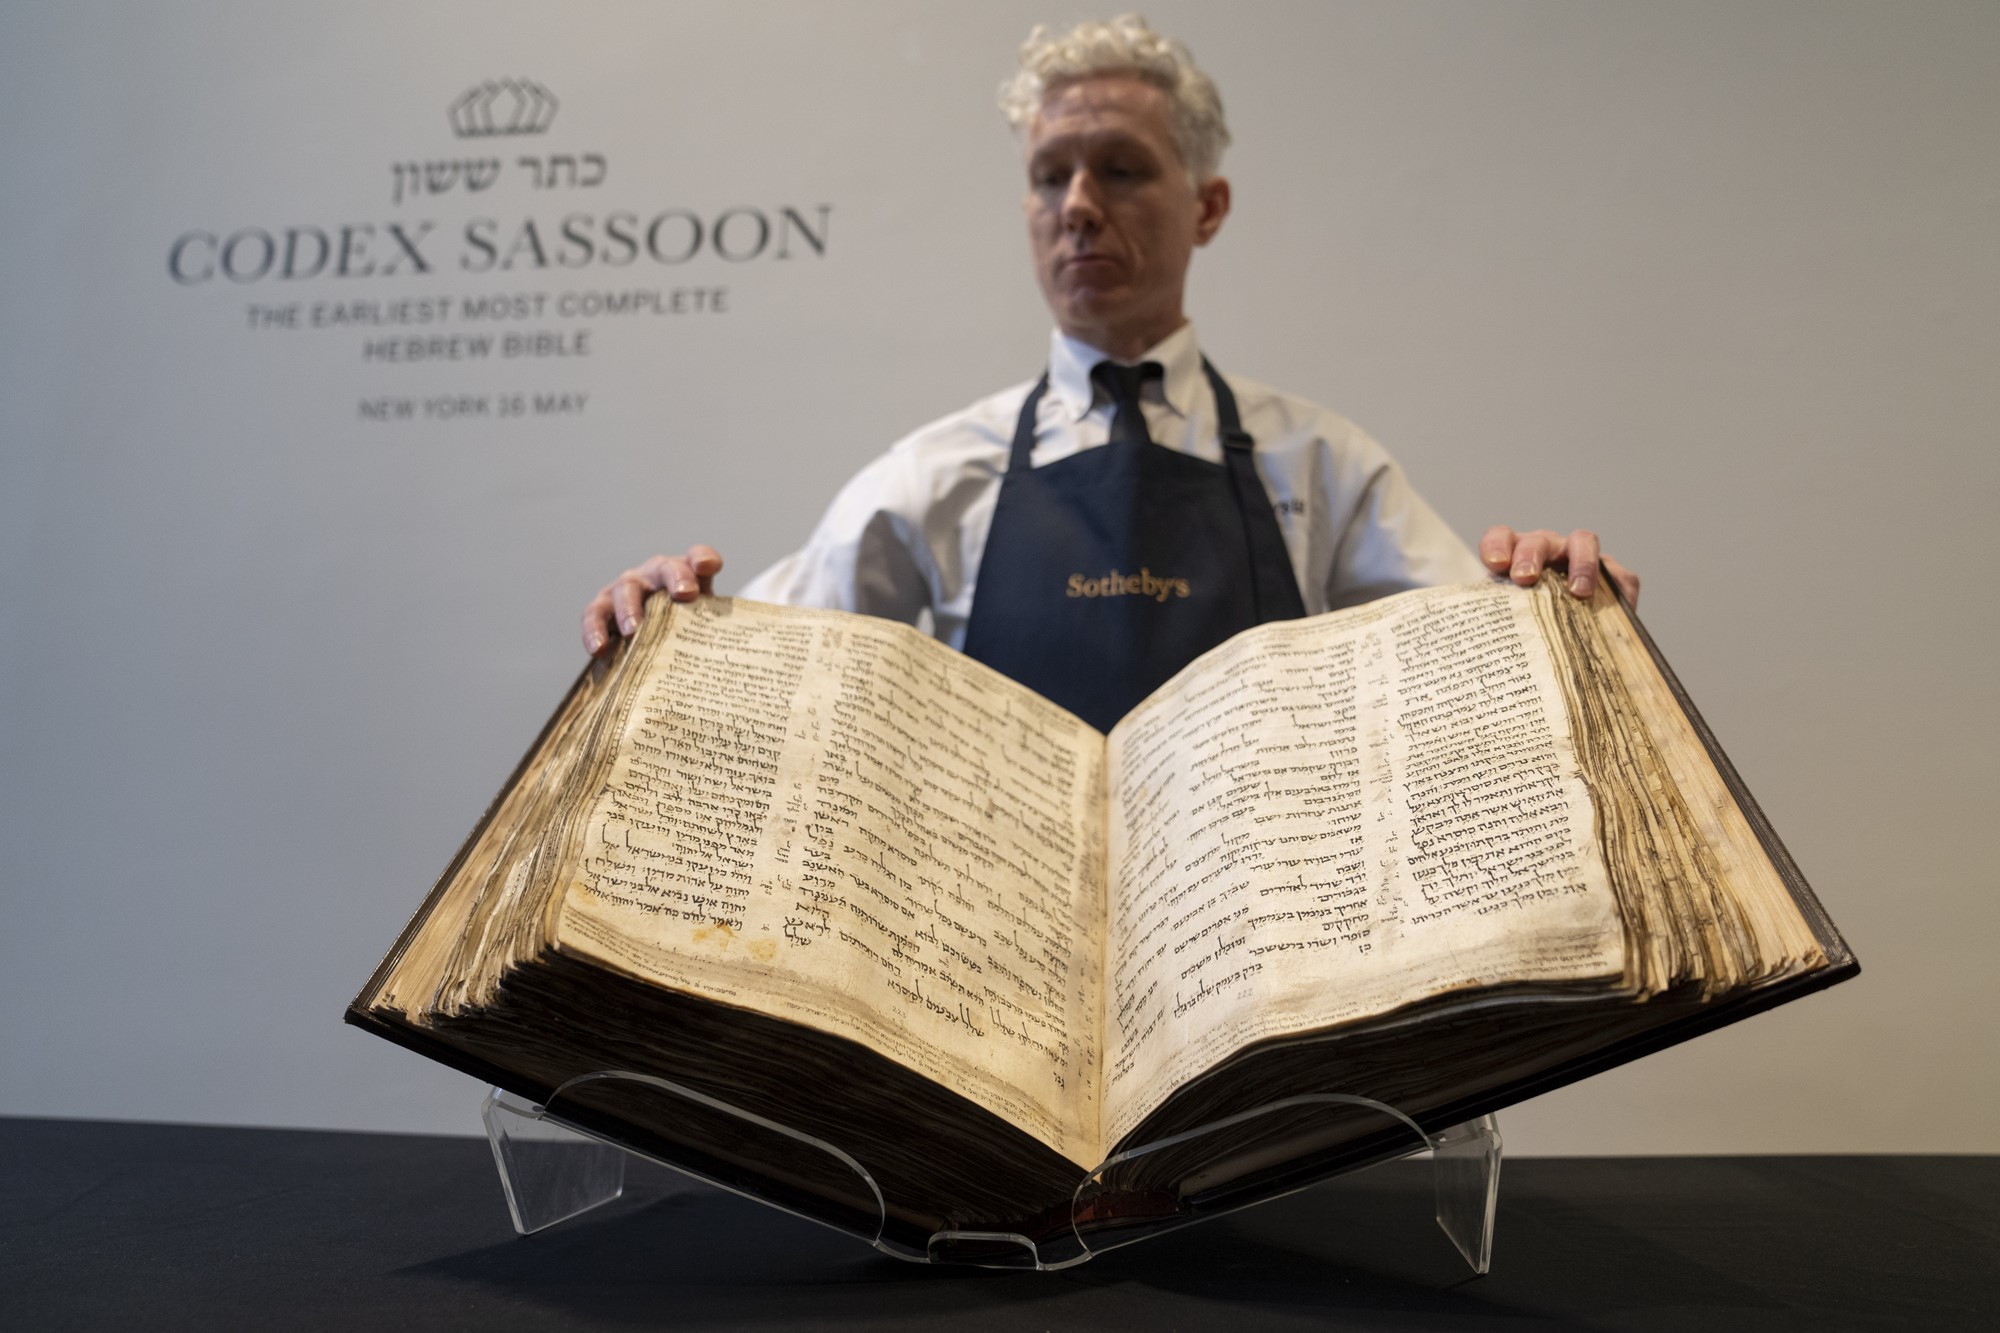 A man in an apron holds out a large, old book for display